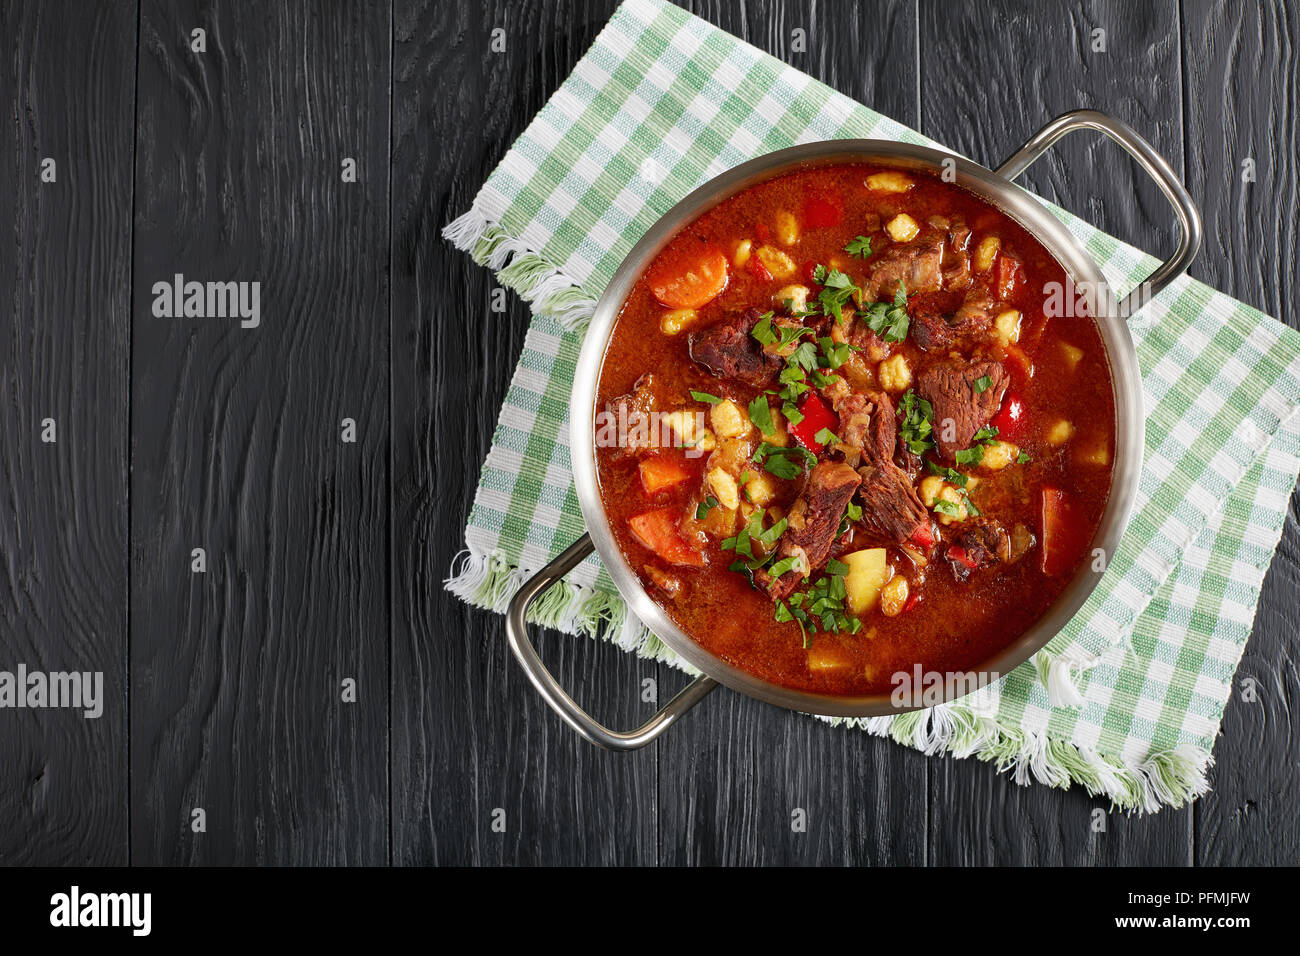 delicious hot hungarian goulash with beef meat, paprika, vegetables and csipetke - small egg noodles in stainless steel pot on black wooden table, cla Stock Photo